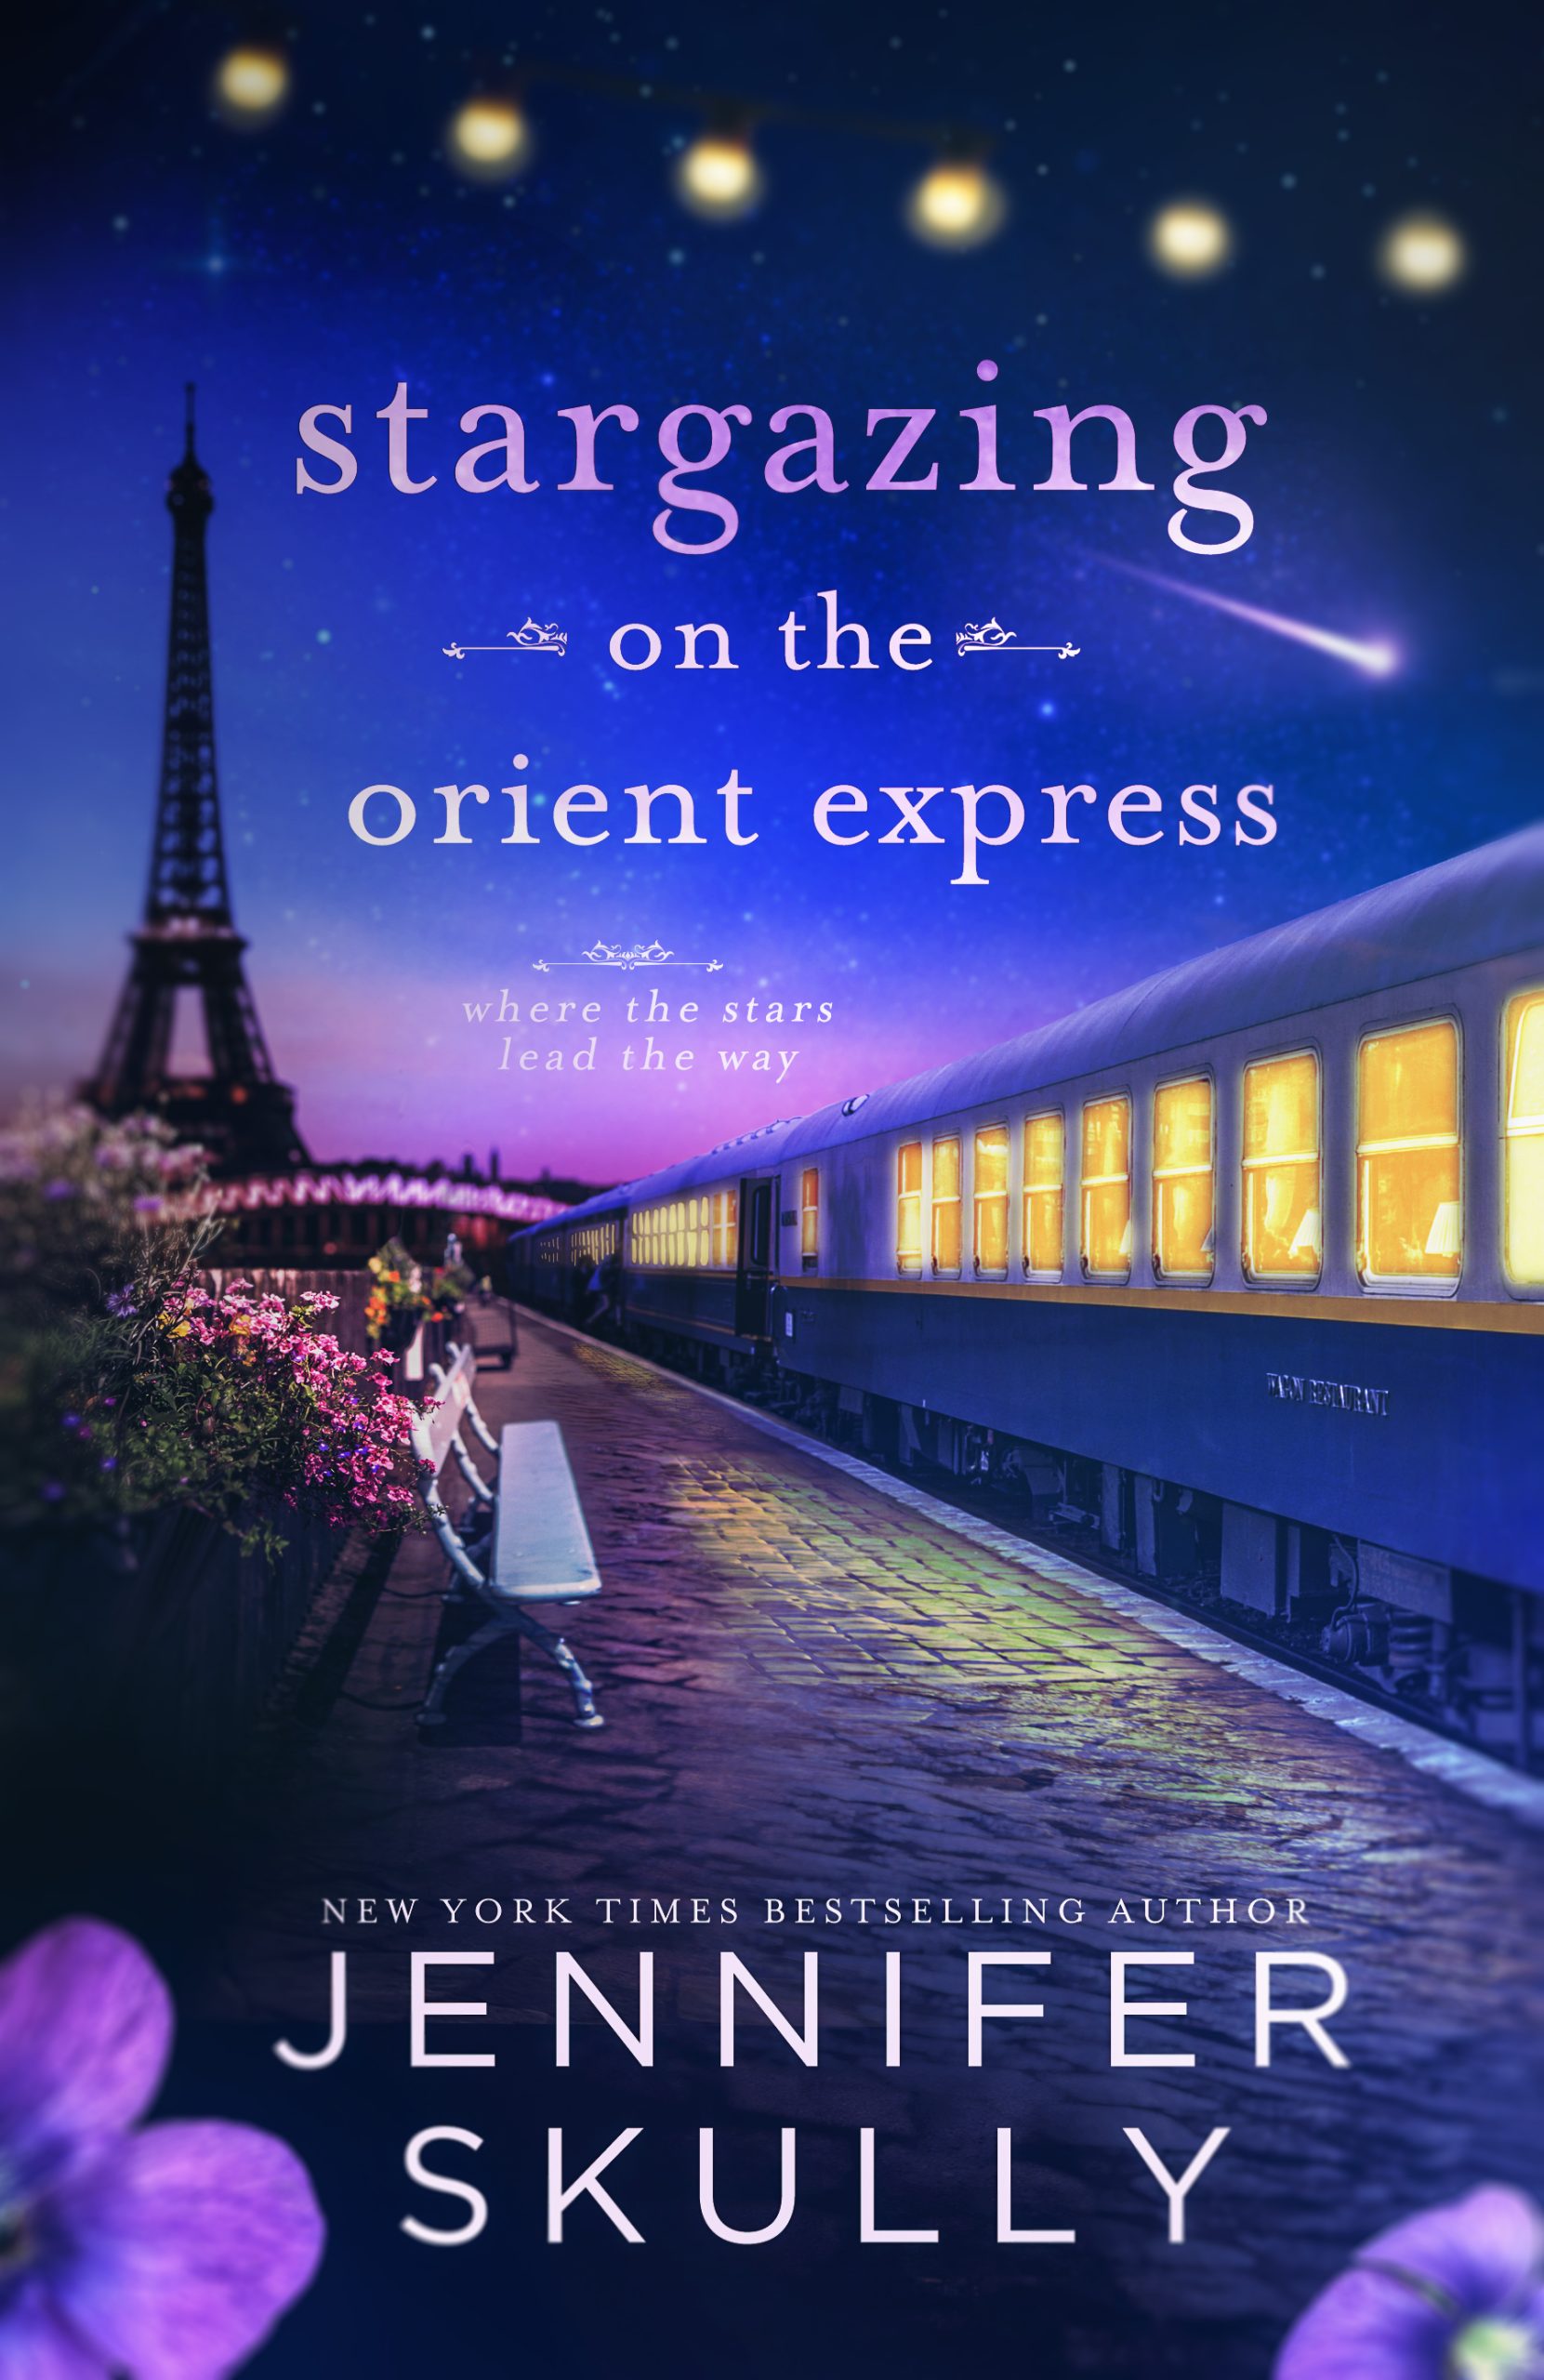 Stargazing on the Orient Express (Once Again Book 5)